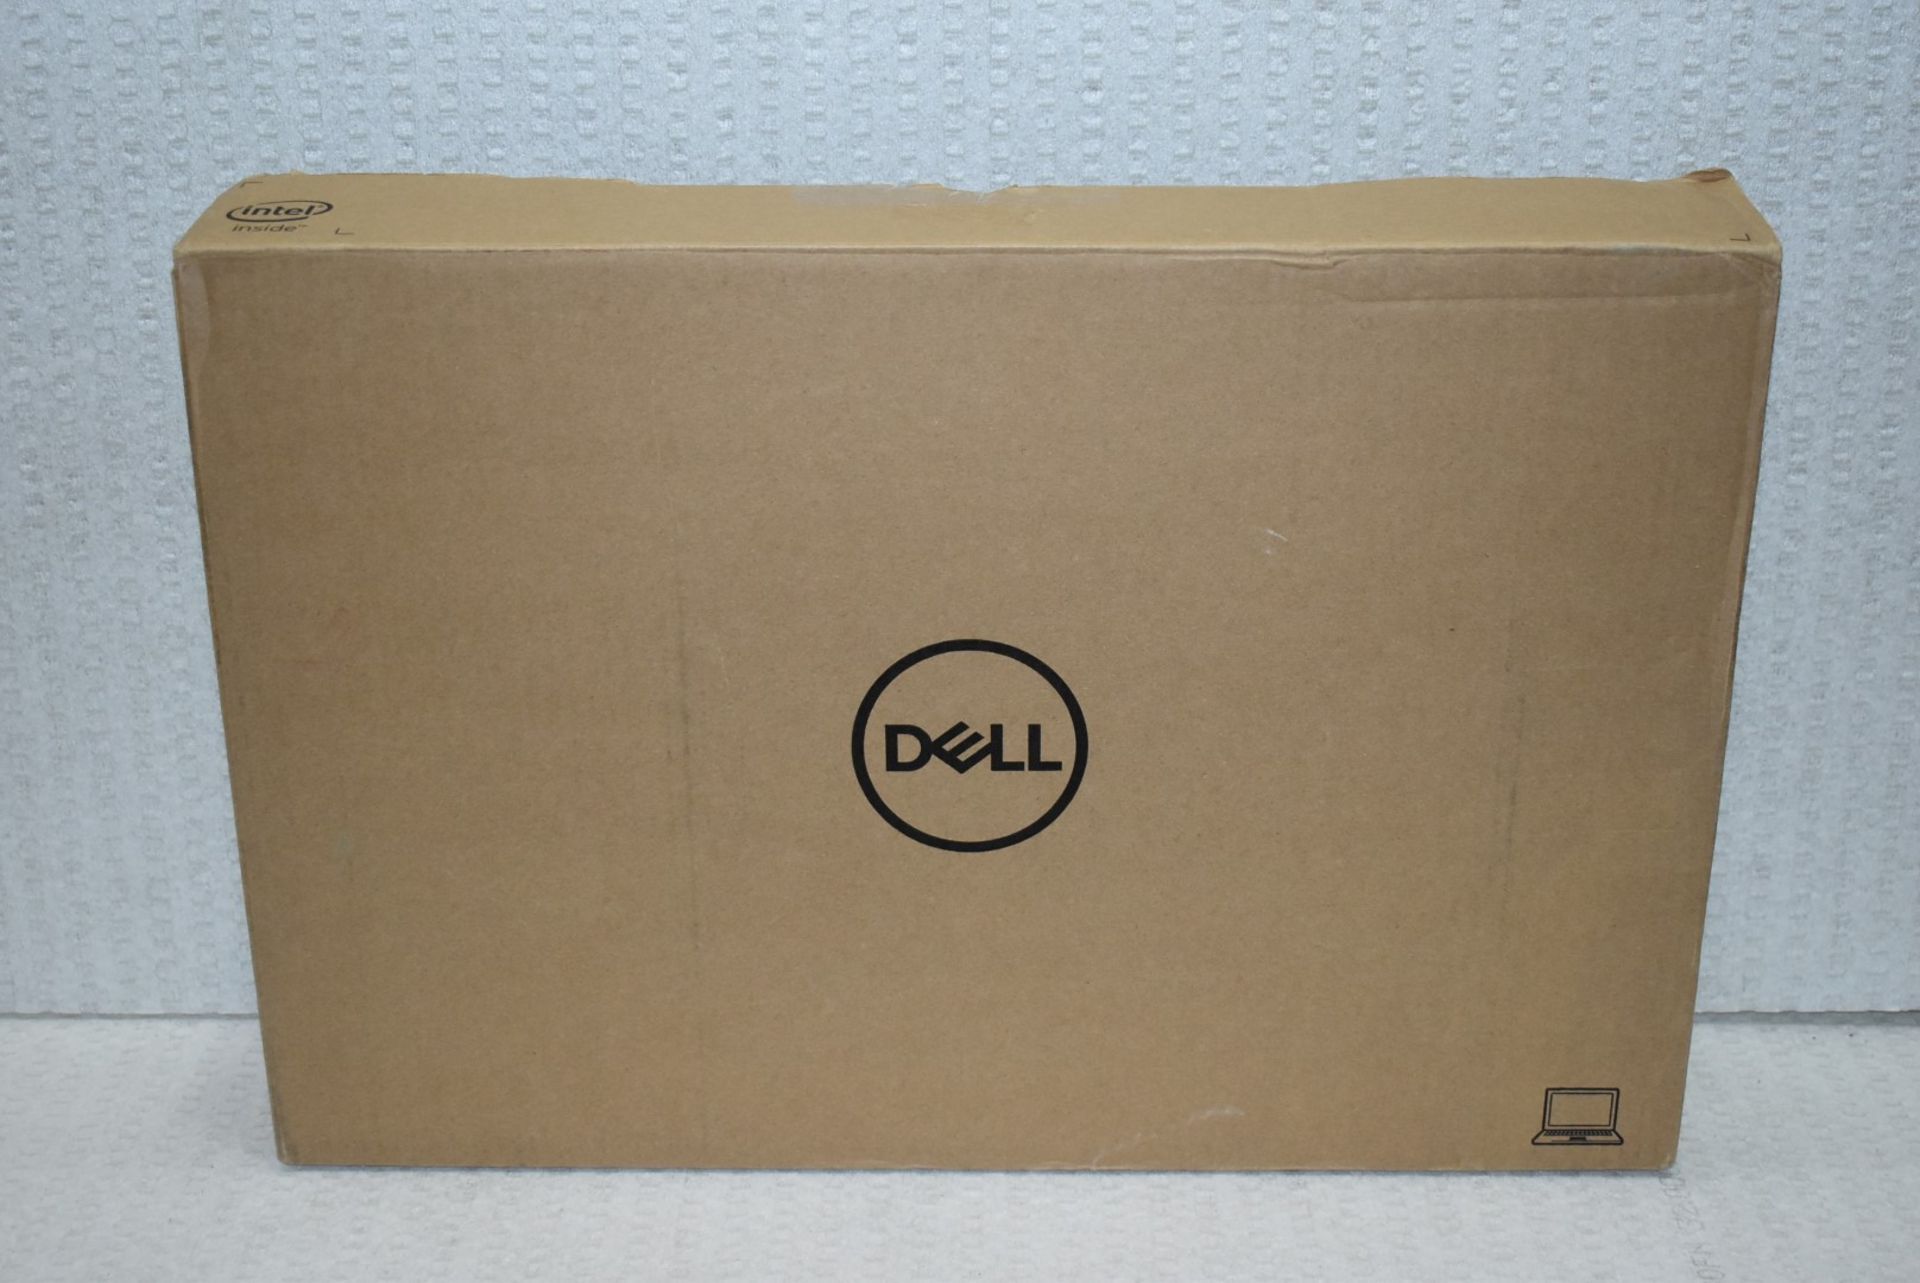 1 x Dell G3 15.6" Gaming Laptop Featuring FHD Screen, Intel I5-9300H Processor, 8gb DDR4 Ram, - Image 4 of 29